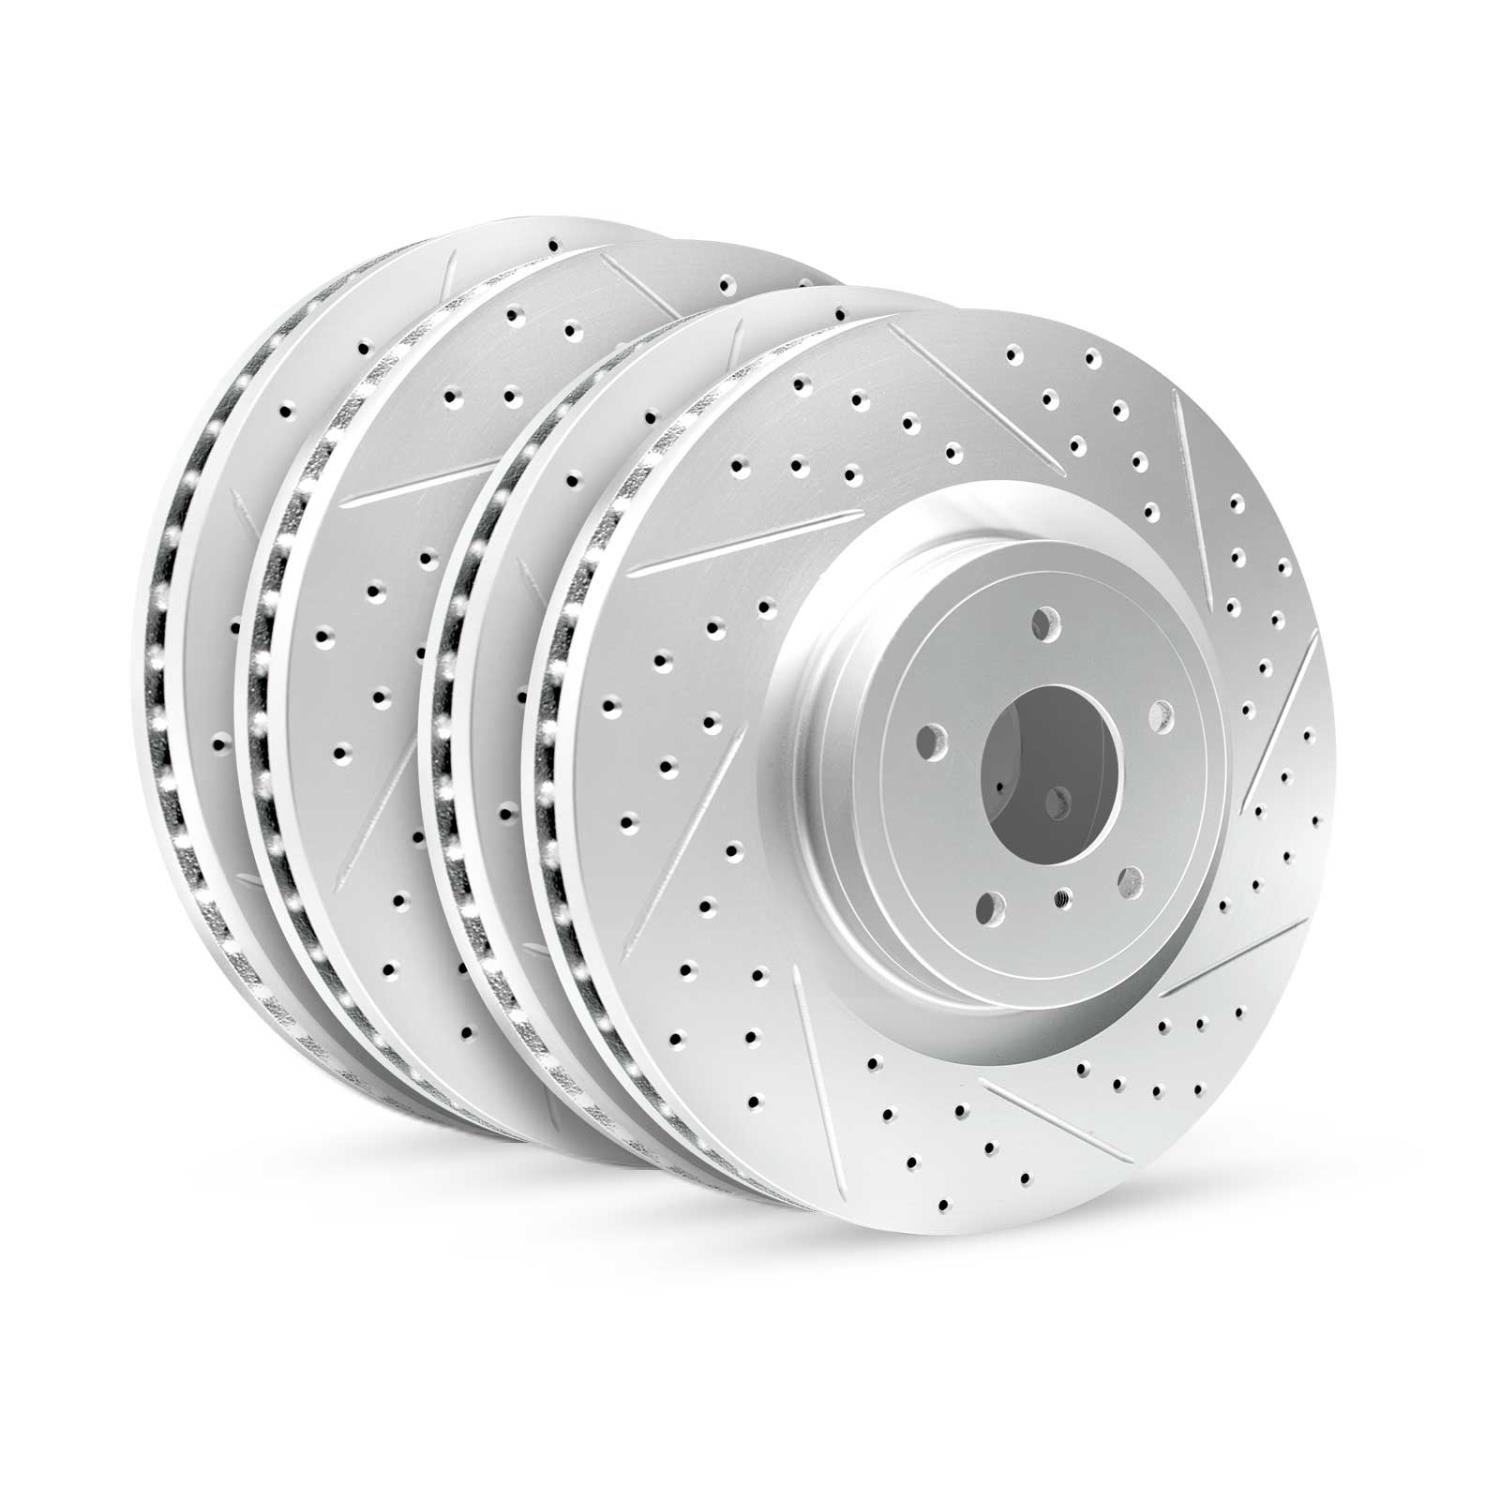 GEO-Carbon Drilled/Slotted Rotors, 2007-2014 Suzuki, Position: Front/Rear